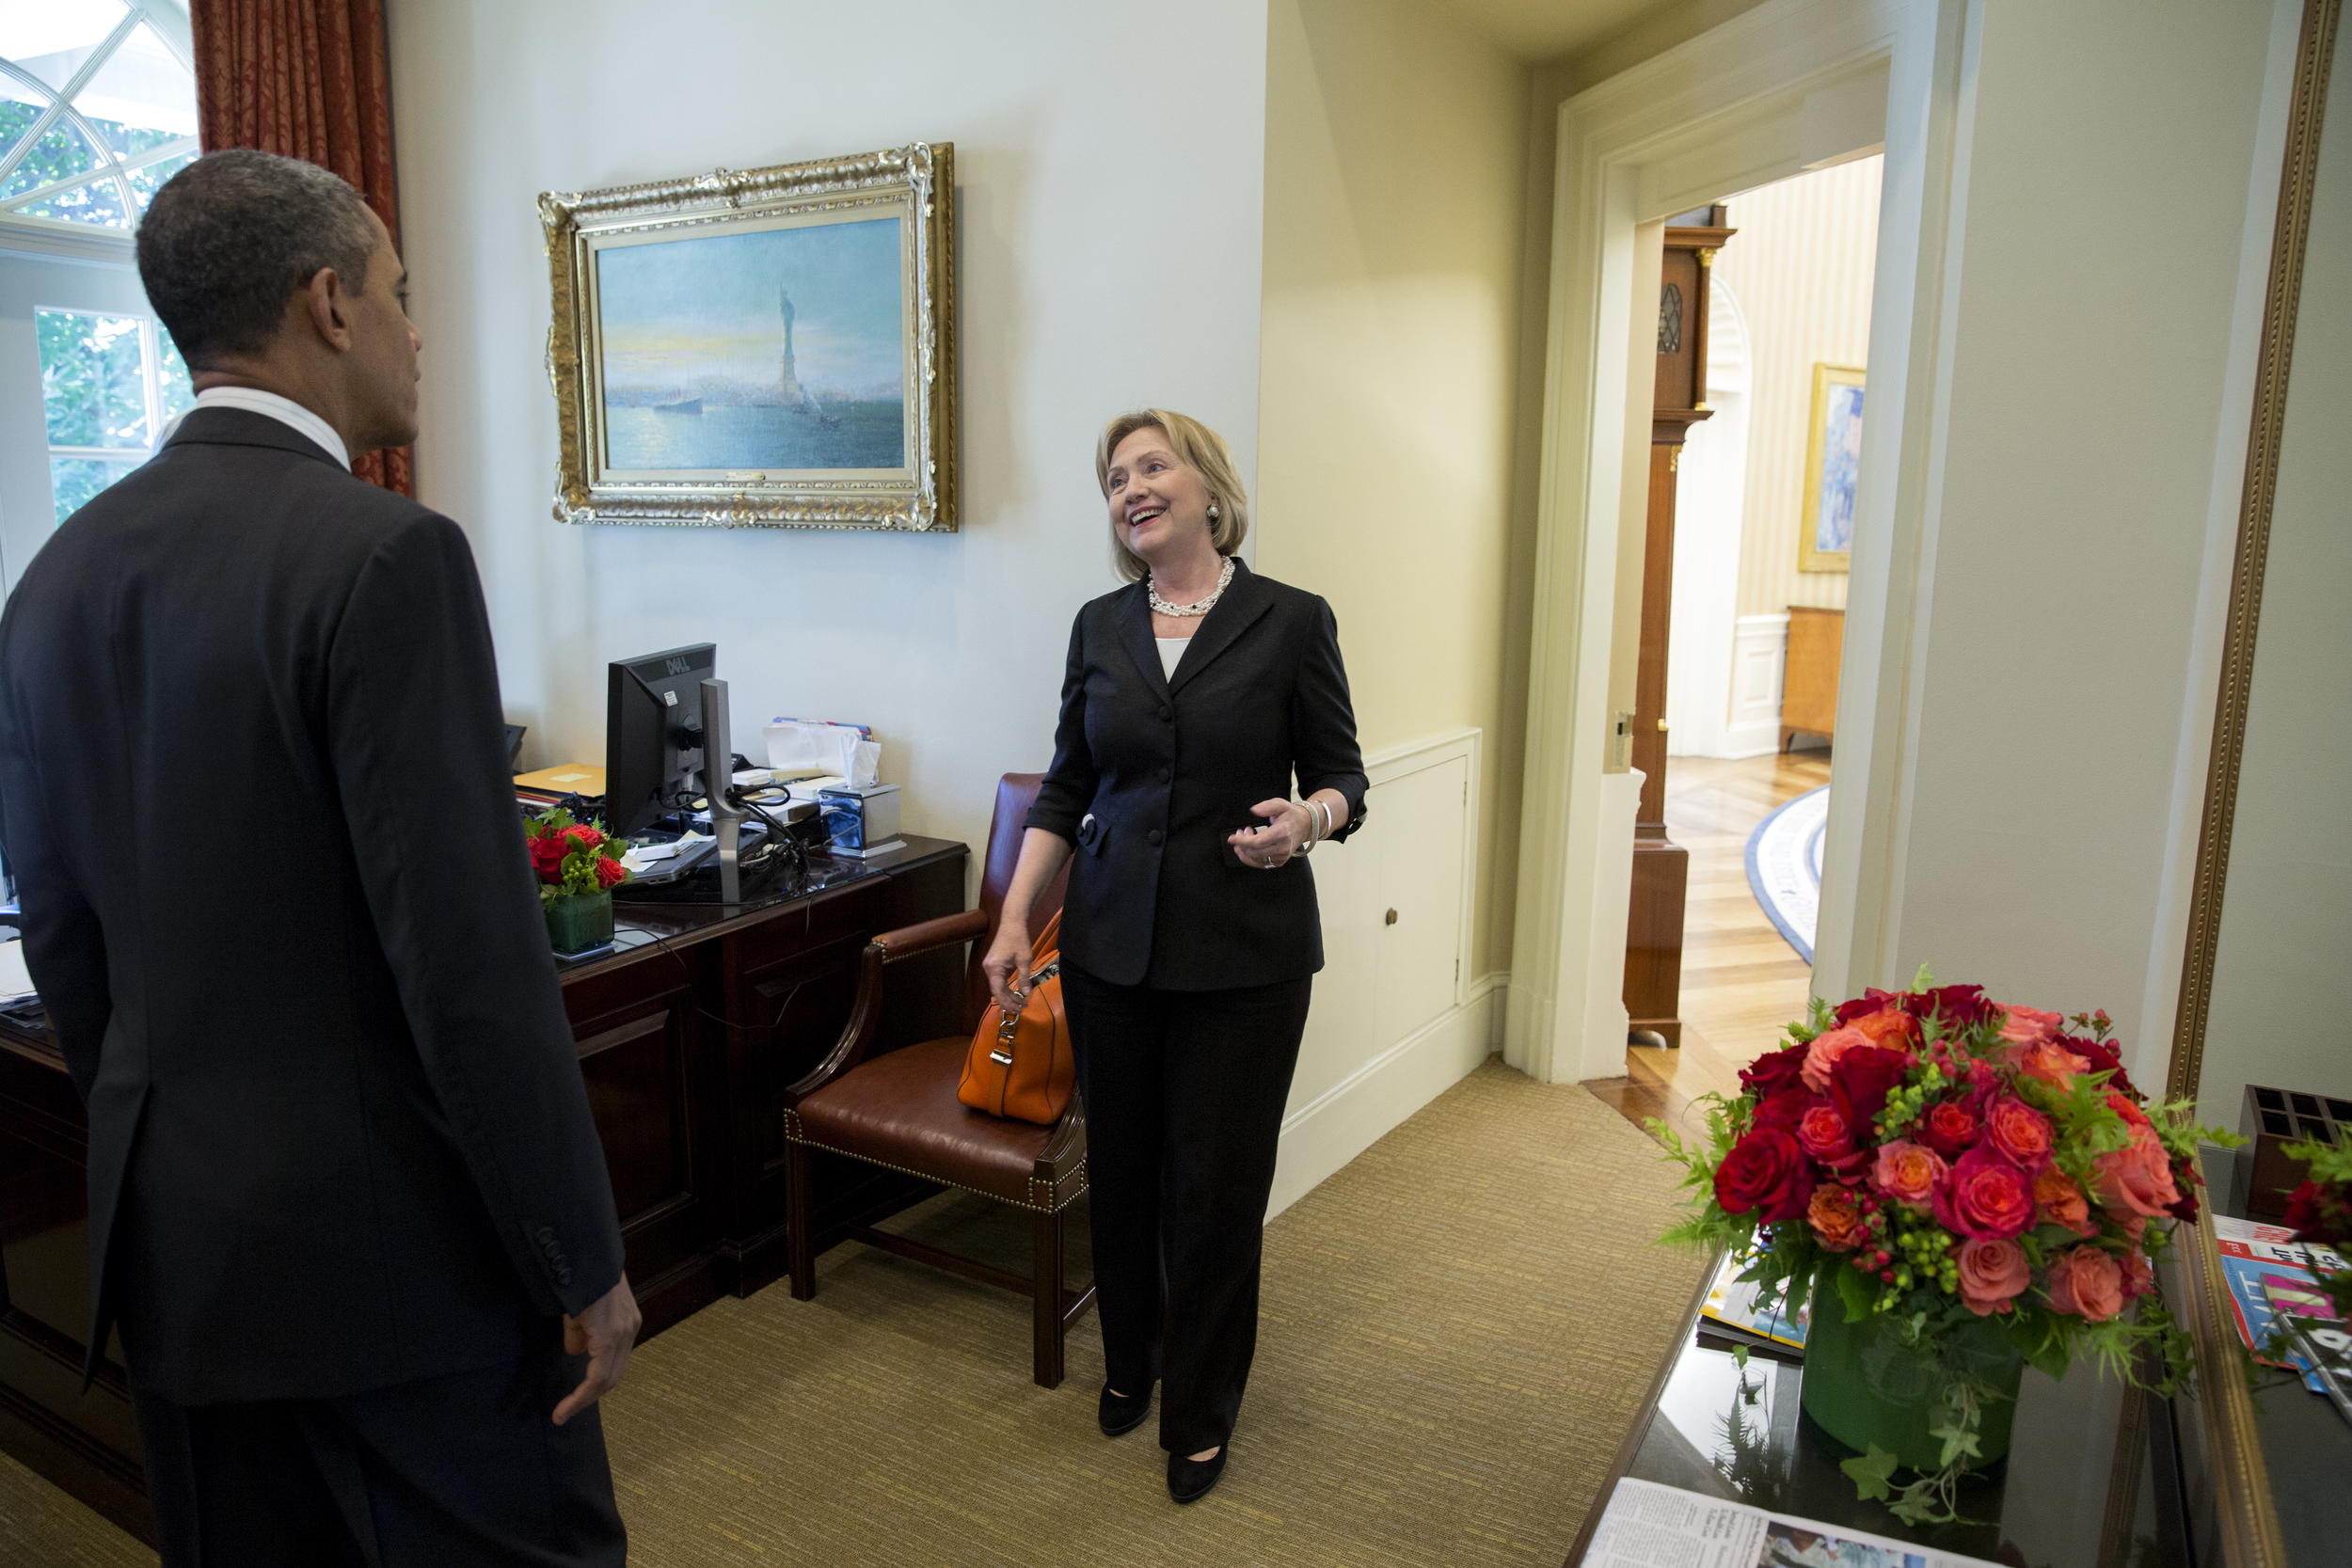 President Obama greets former Secretary of State Hillary Rodham Clinton in the Outer Oval Office. 2013.